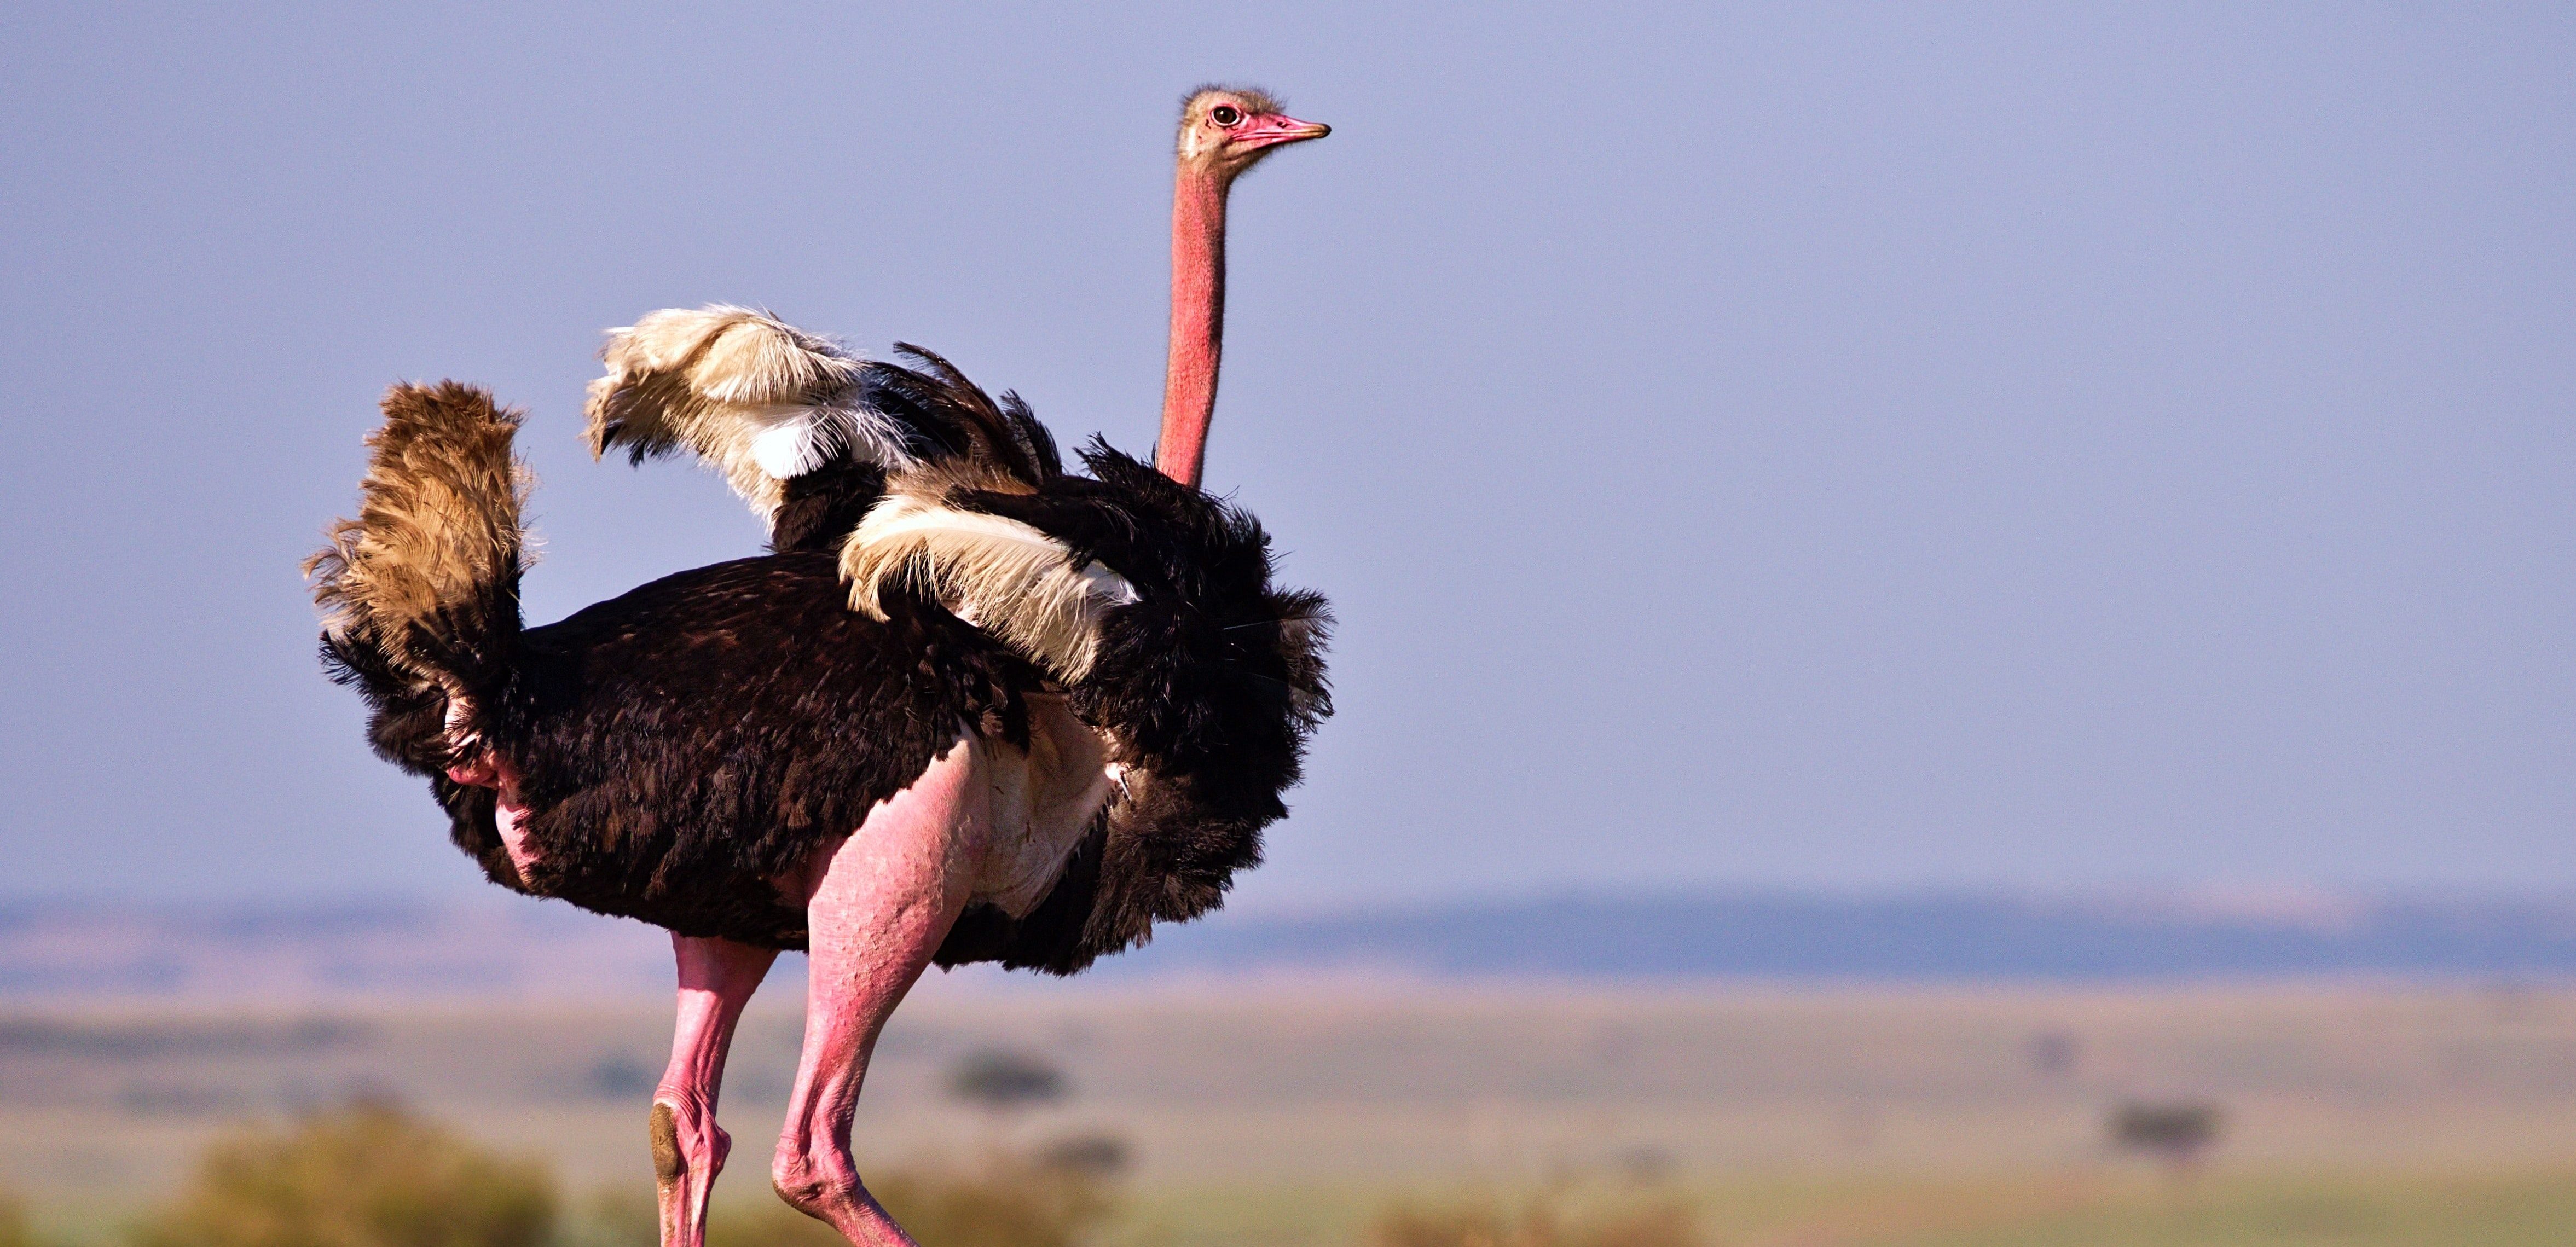 Do ostriches have wings?